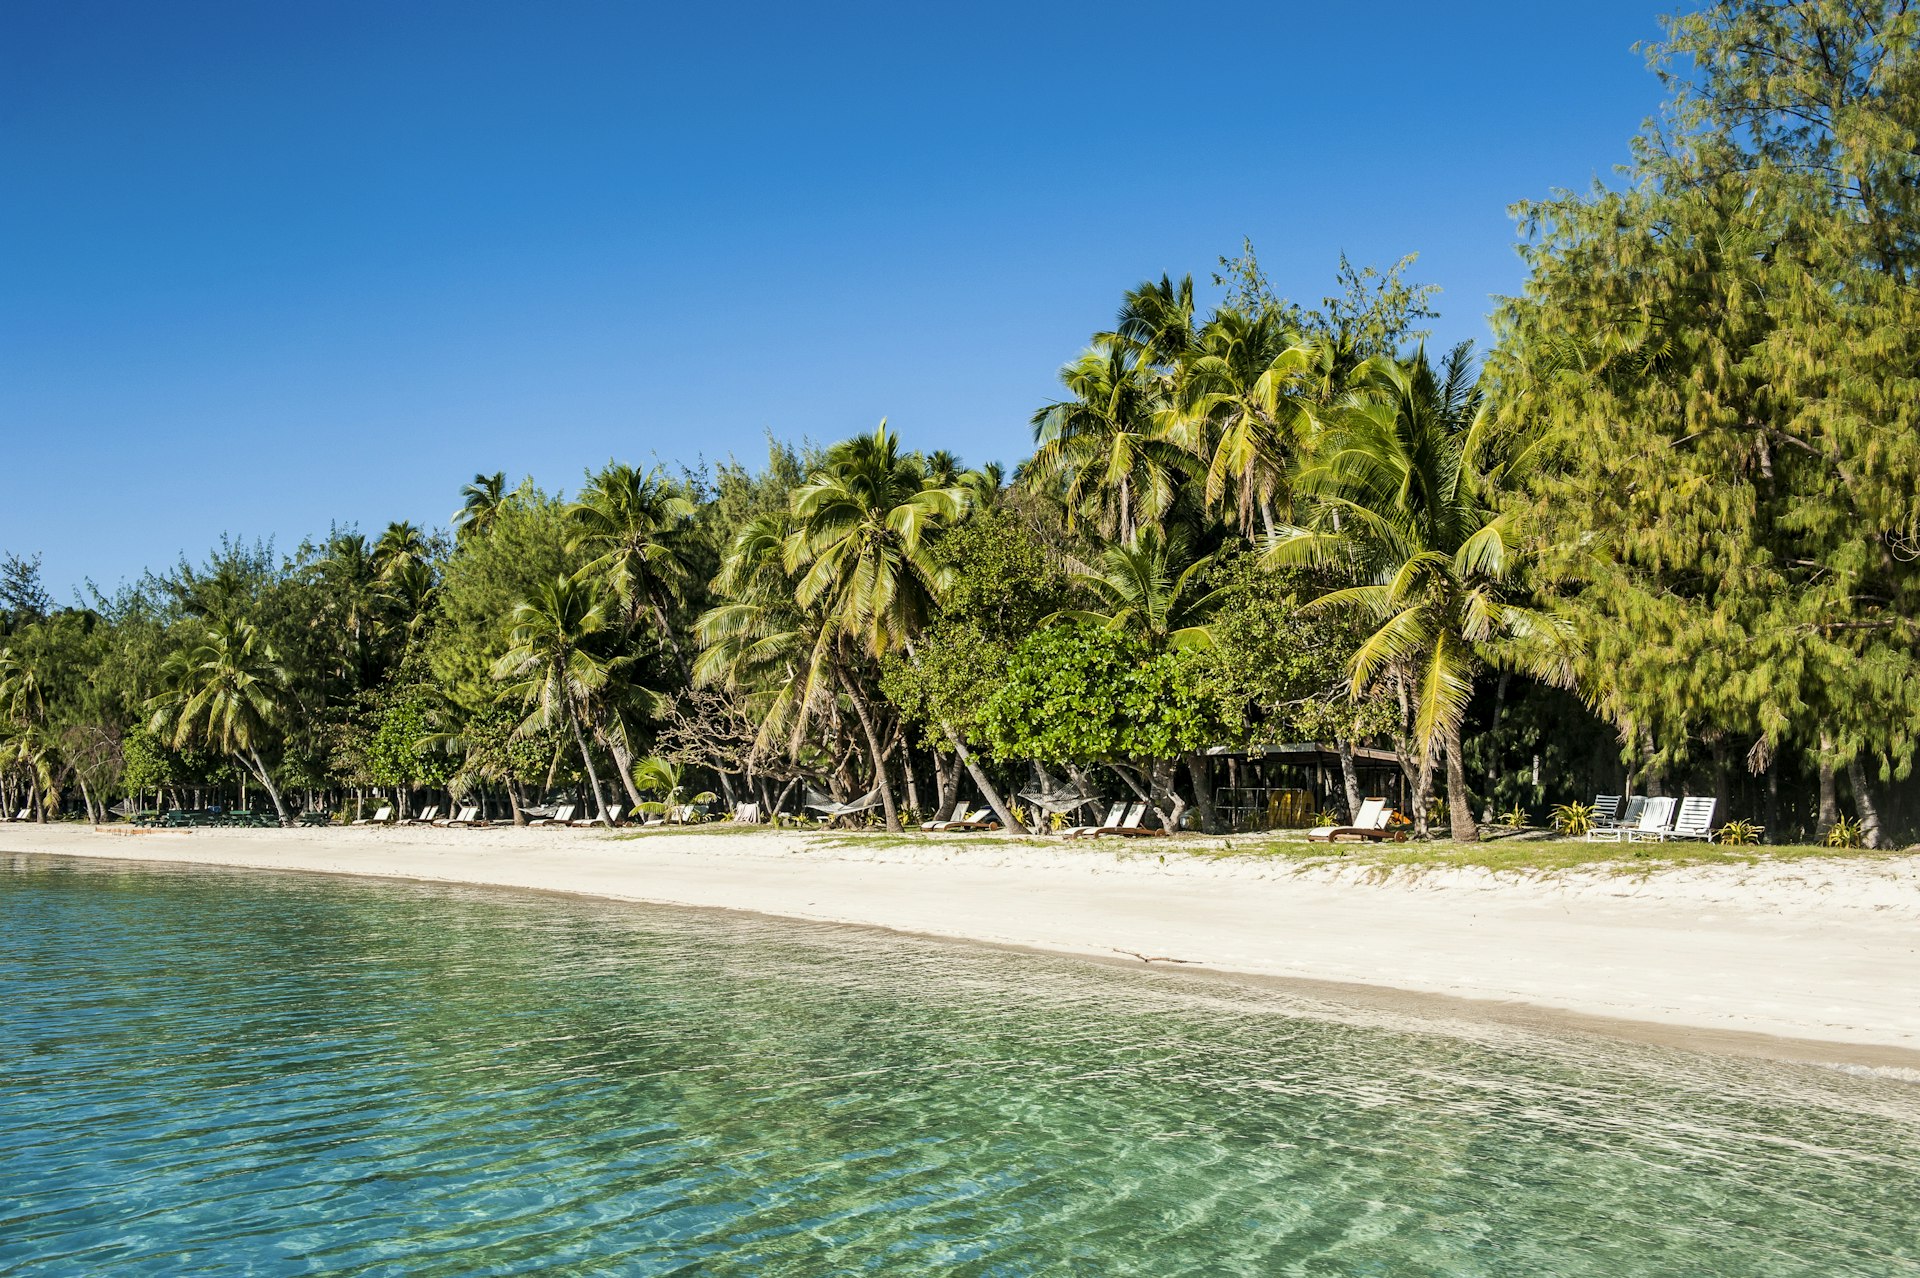 A view of a white sand beach from the water. The waters lapping the beach are still and turquoise, while the forest behind it is dense and green. A blue sky is visible overhead.